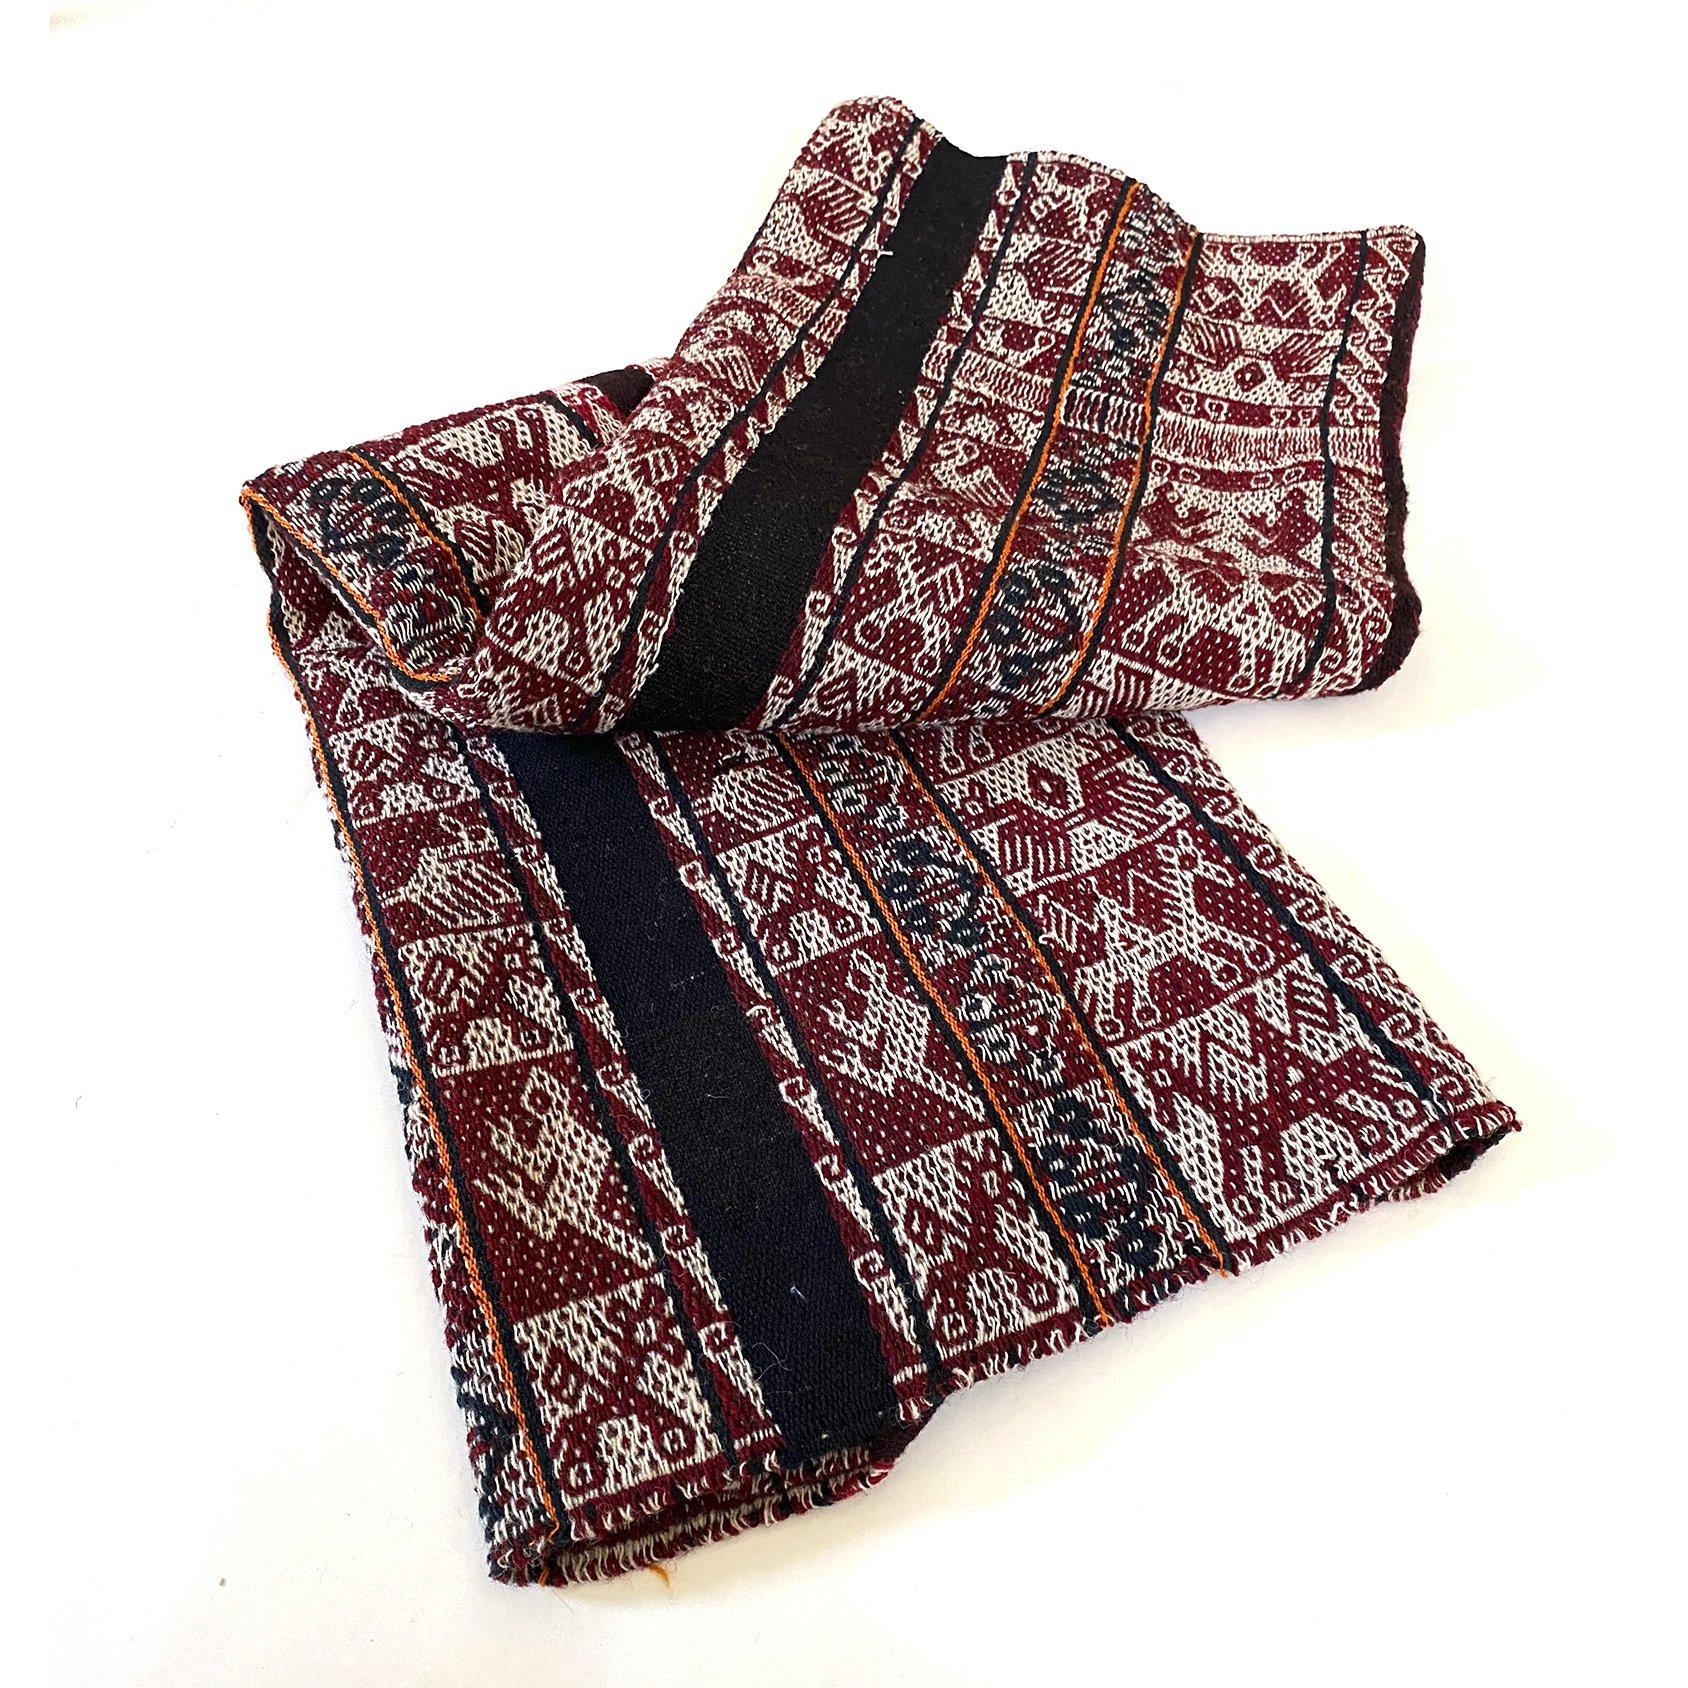 Vintage shoulder cloth (Manta) or carrying cloth(Aguayo) is fromt he Quechua people of the Sacred Valley of the Peruvian Andes in the Cuszo area. 

Woven entirely of wool using the warp-faced double-weave technique so that both sides have an